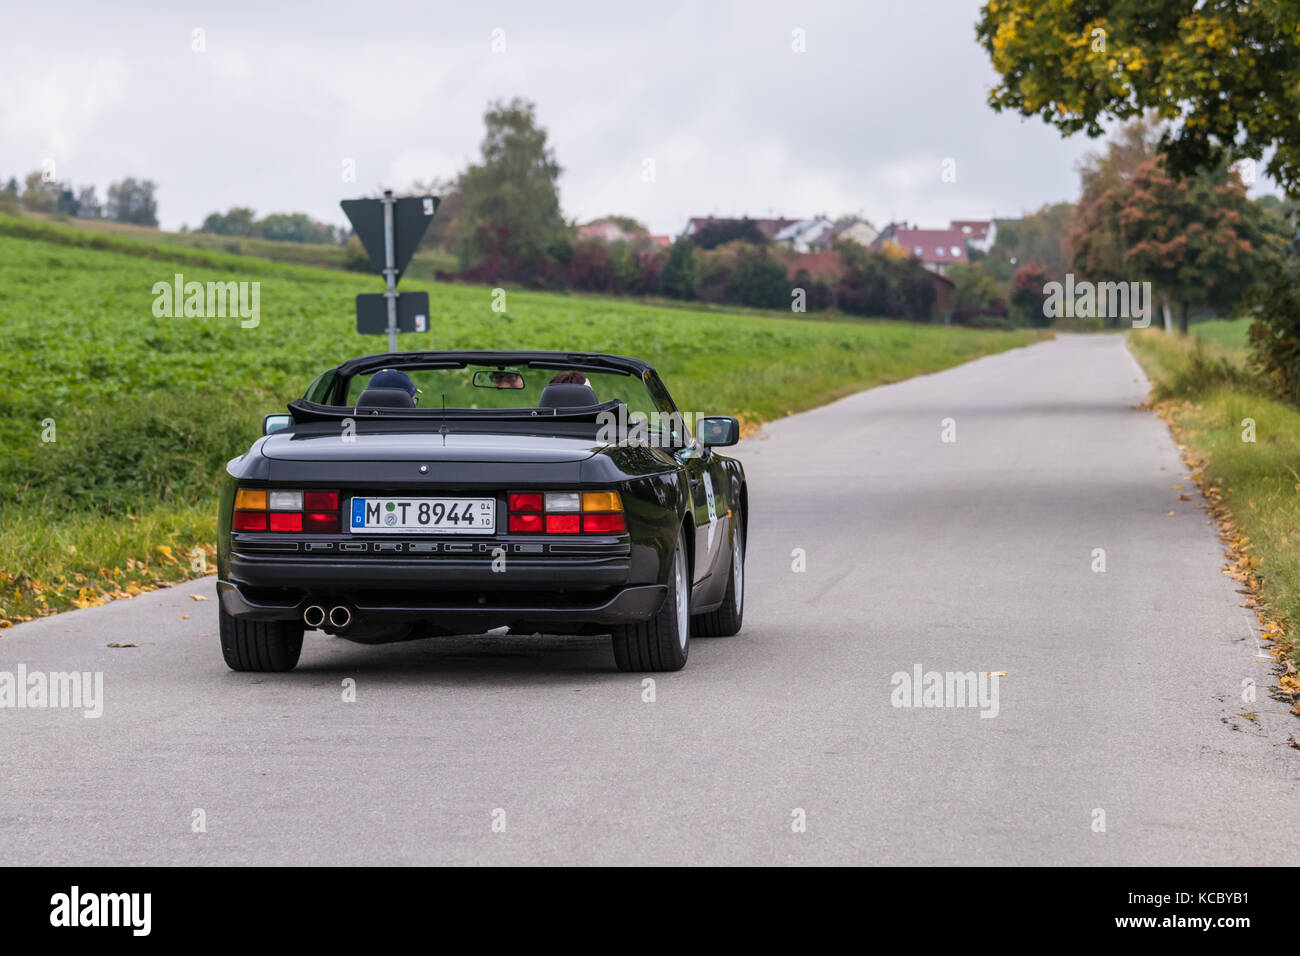 Augsburg, Germany - October 1, 2017: Porsche 944 oldtimer car at the Fuggerstadt Classic 2017 Oldtimer Rallye on October 1, 2017 in Augsburg, Germany. Stock Photo